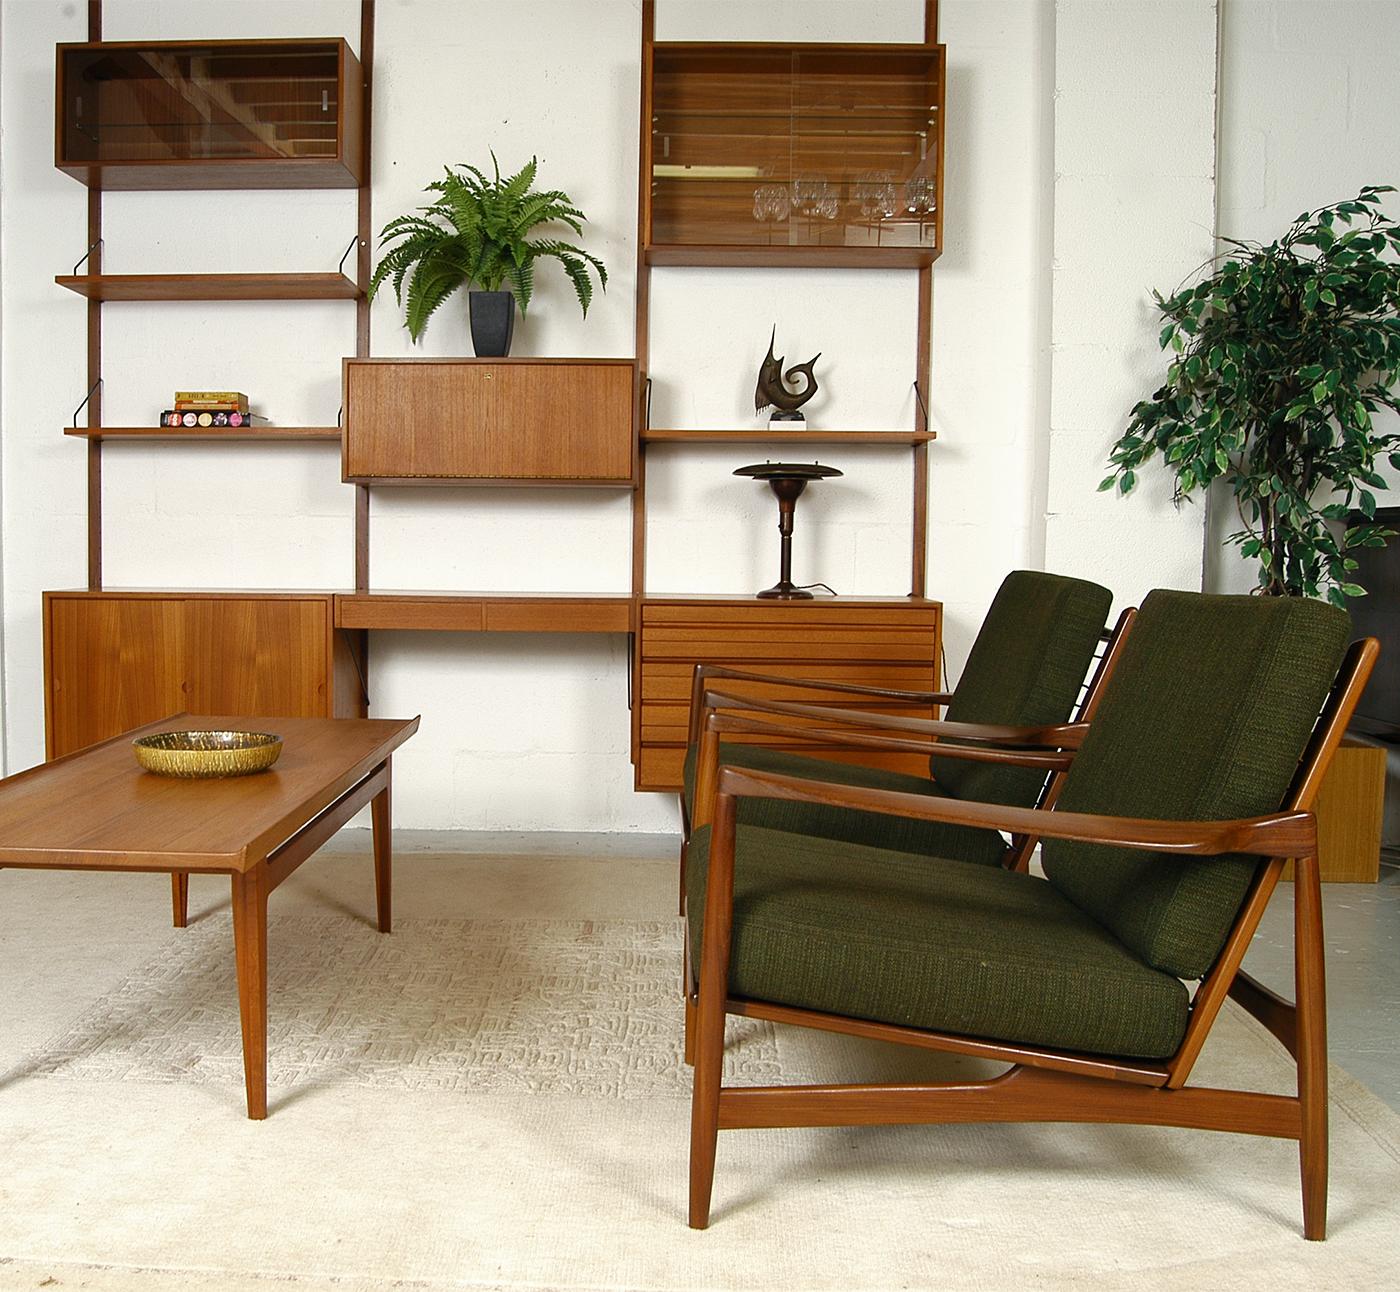 To meet the increasing demand for 1960s Scandinavian imported furniture, UK company, G-Plan hired Danish designer Ib Kofod-Larsen to create an entirely new and exclusive range for them – G-Plan's 